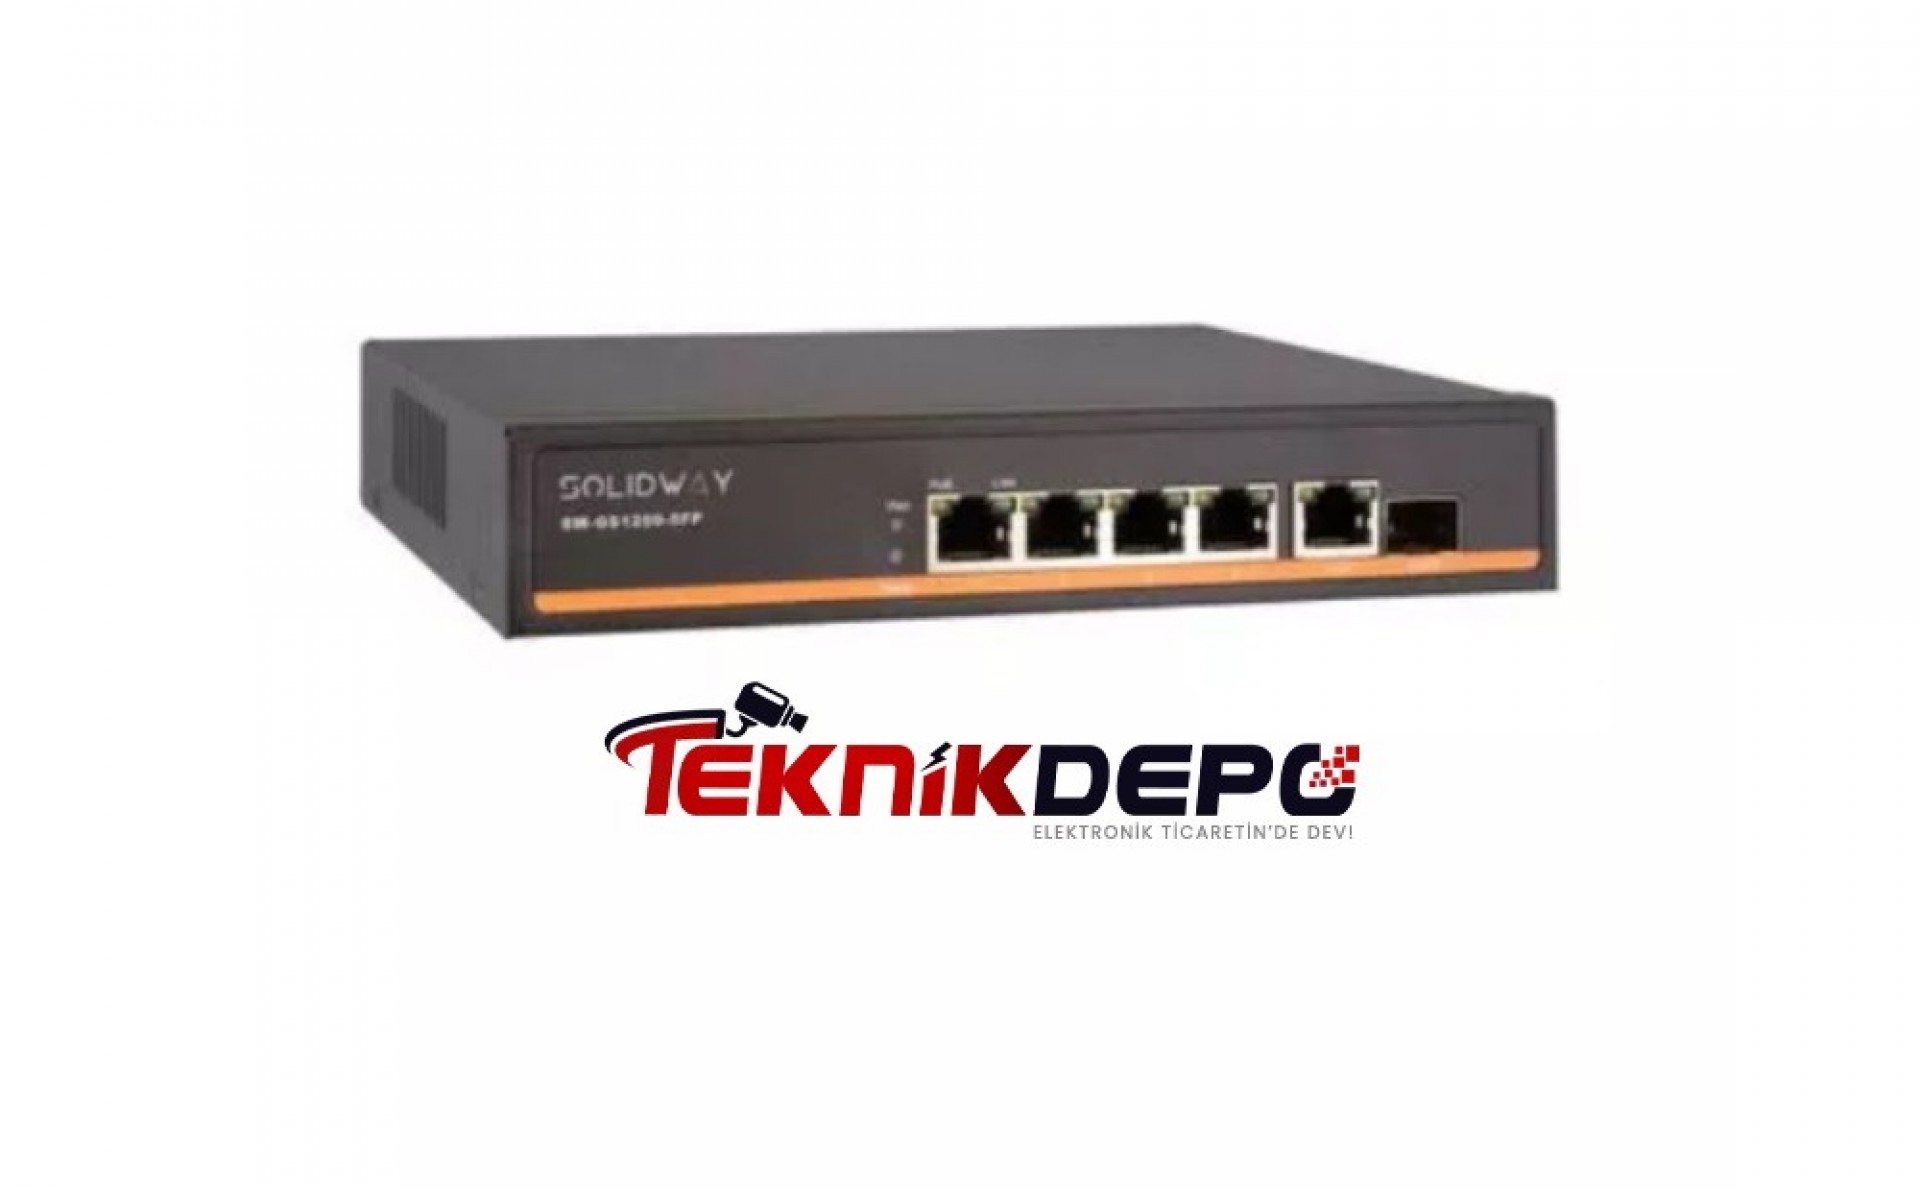 Solidway SW-GS1200-6FP  PoE Switch